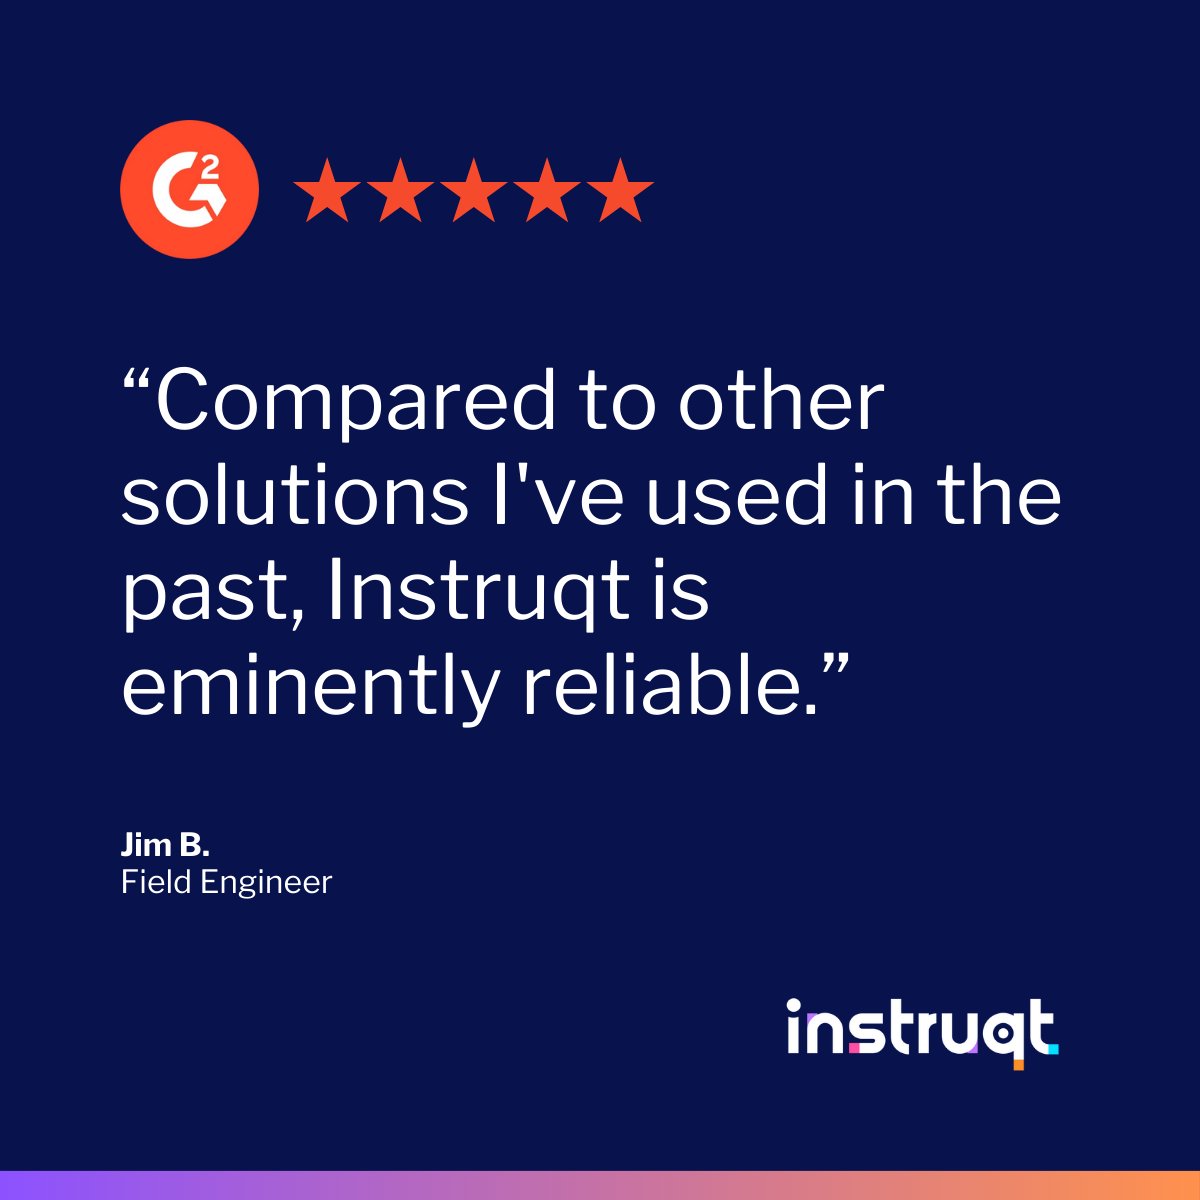 We like to think Instruqt is considered a team member by our customers. Reliability is a job requirement to deliver value consistently. Read the full review: bit.ly/3wD5ABw